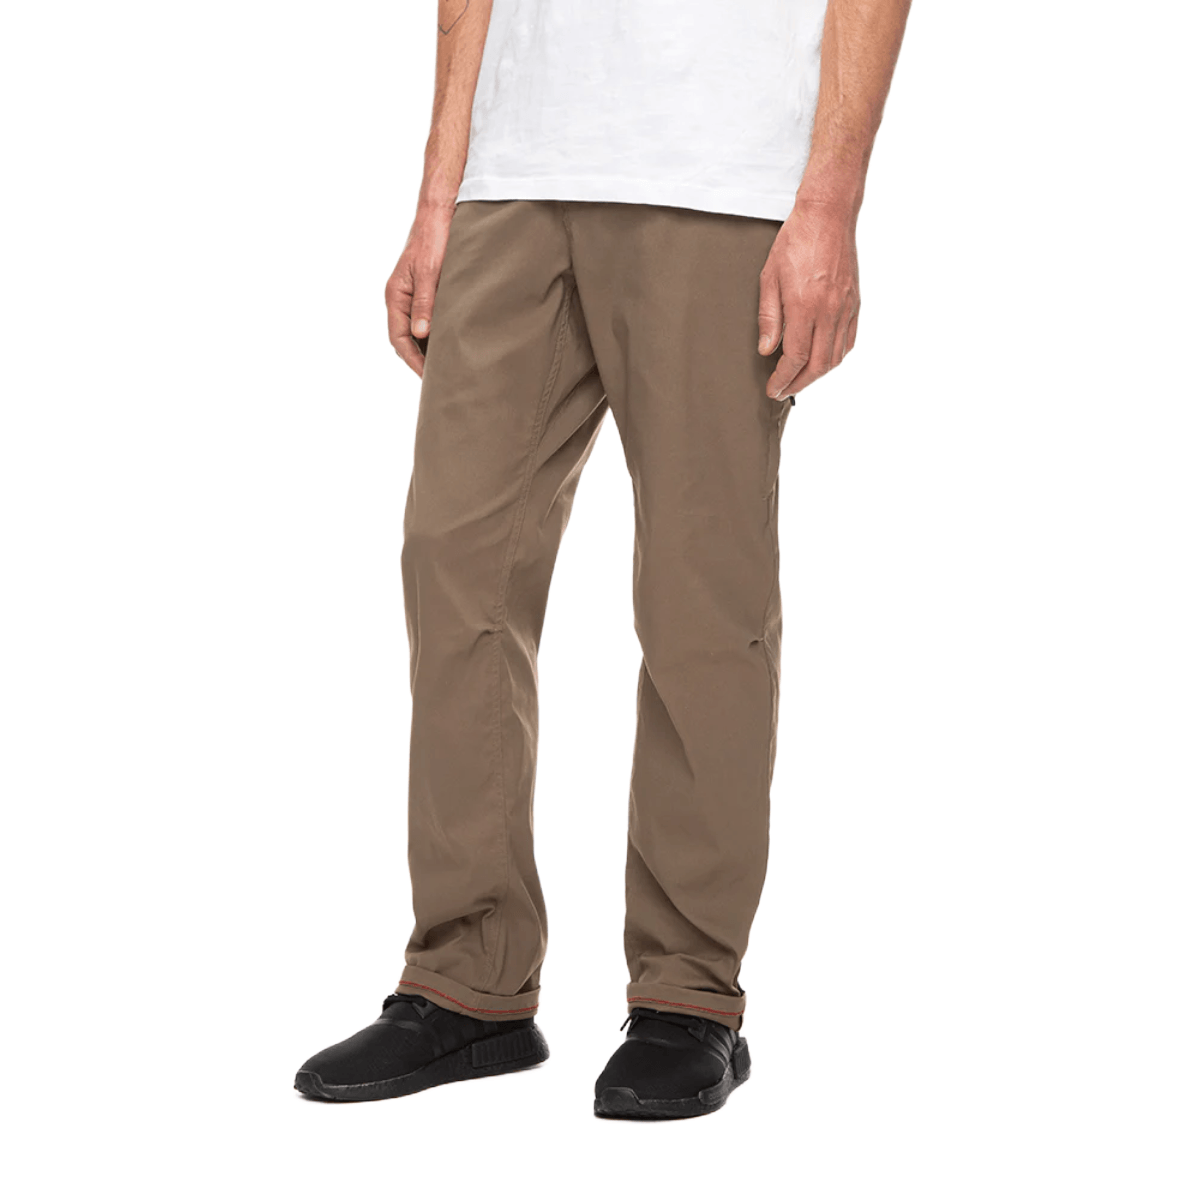 686 Everywhere Relaxed Fit Pant - Men's - Bobwards.com